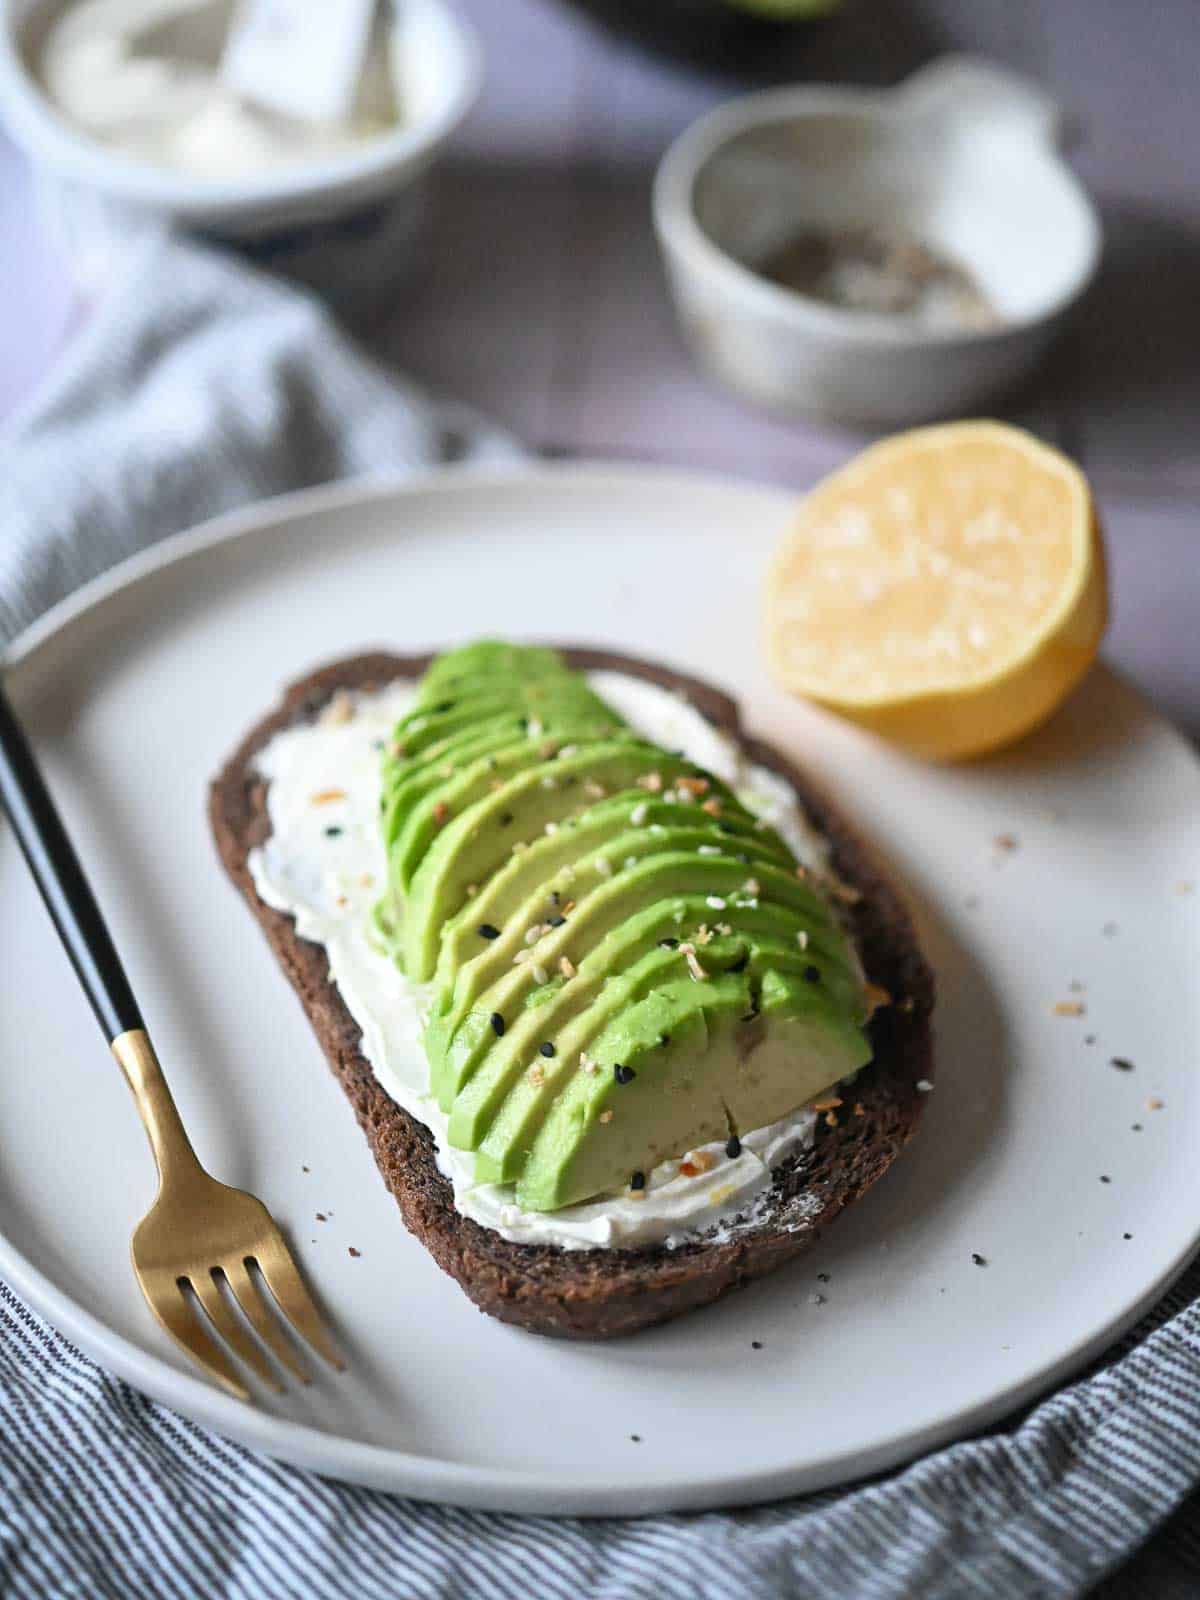 Sliced avocado on pumpernickel bread with cream cheese and spices.